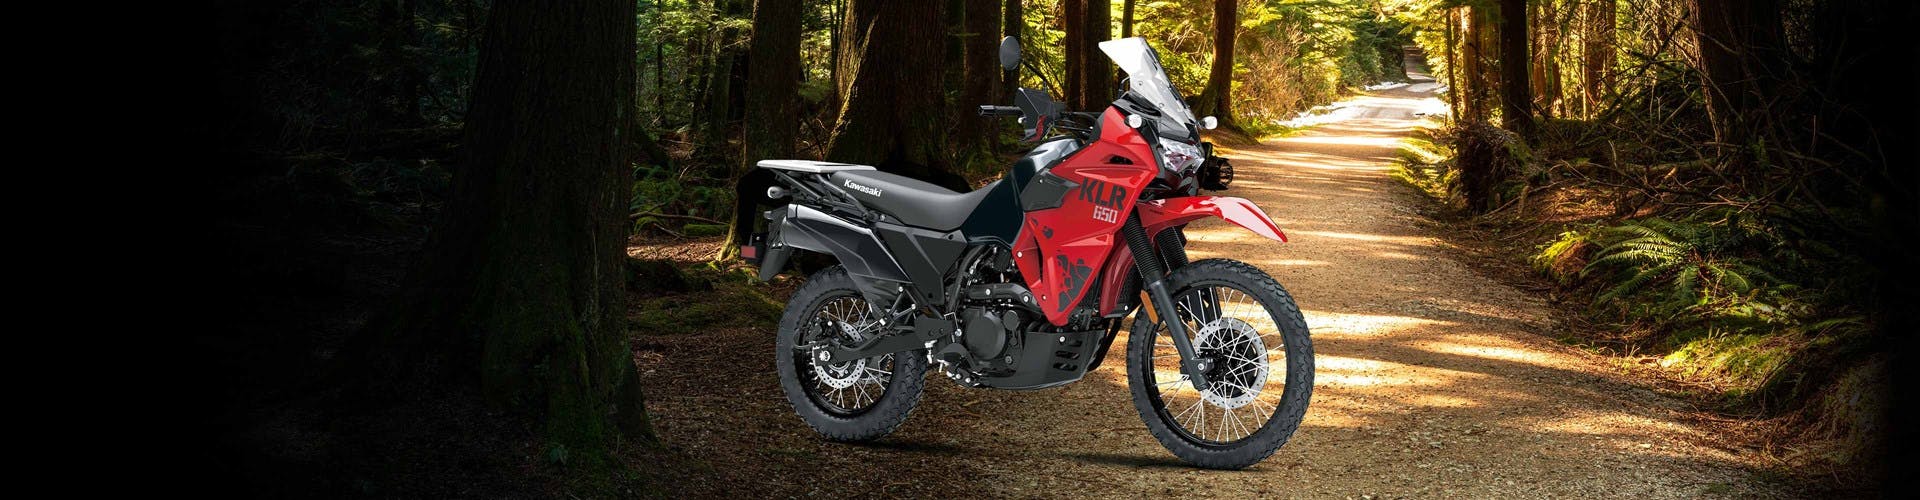 Kawasaki KLR650 in red and gray colour on off road track